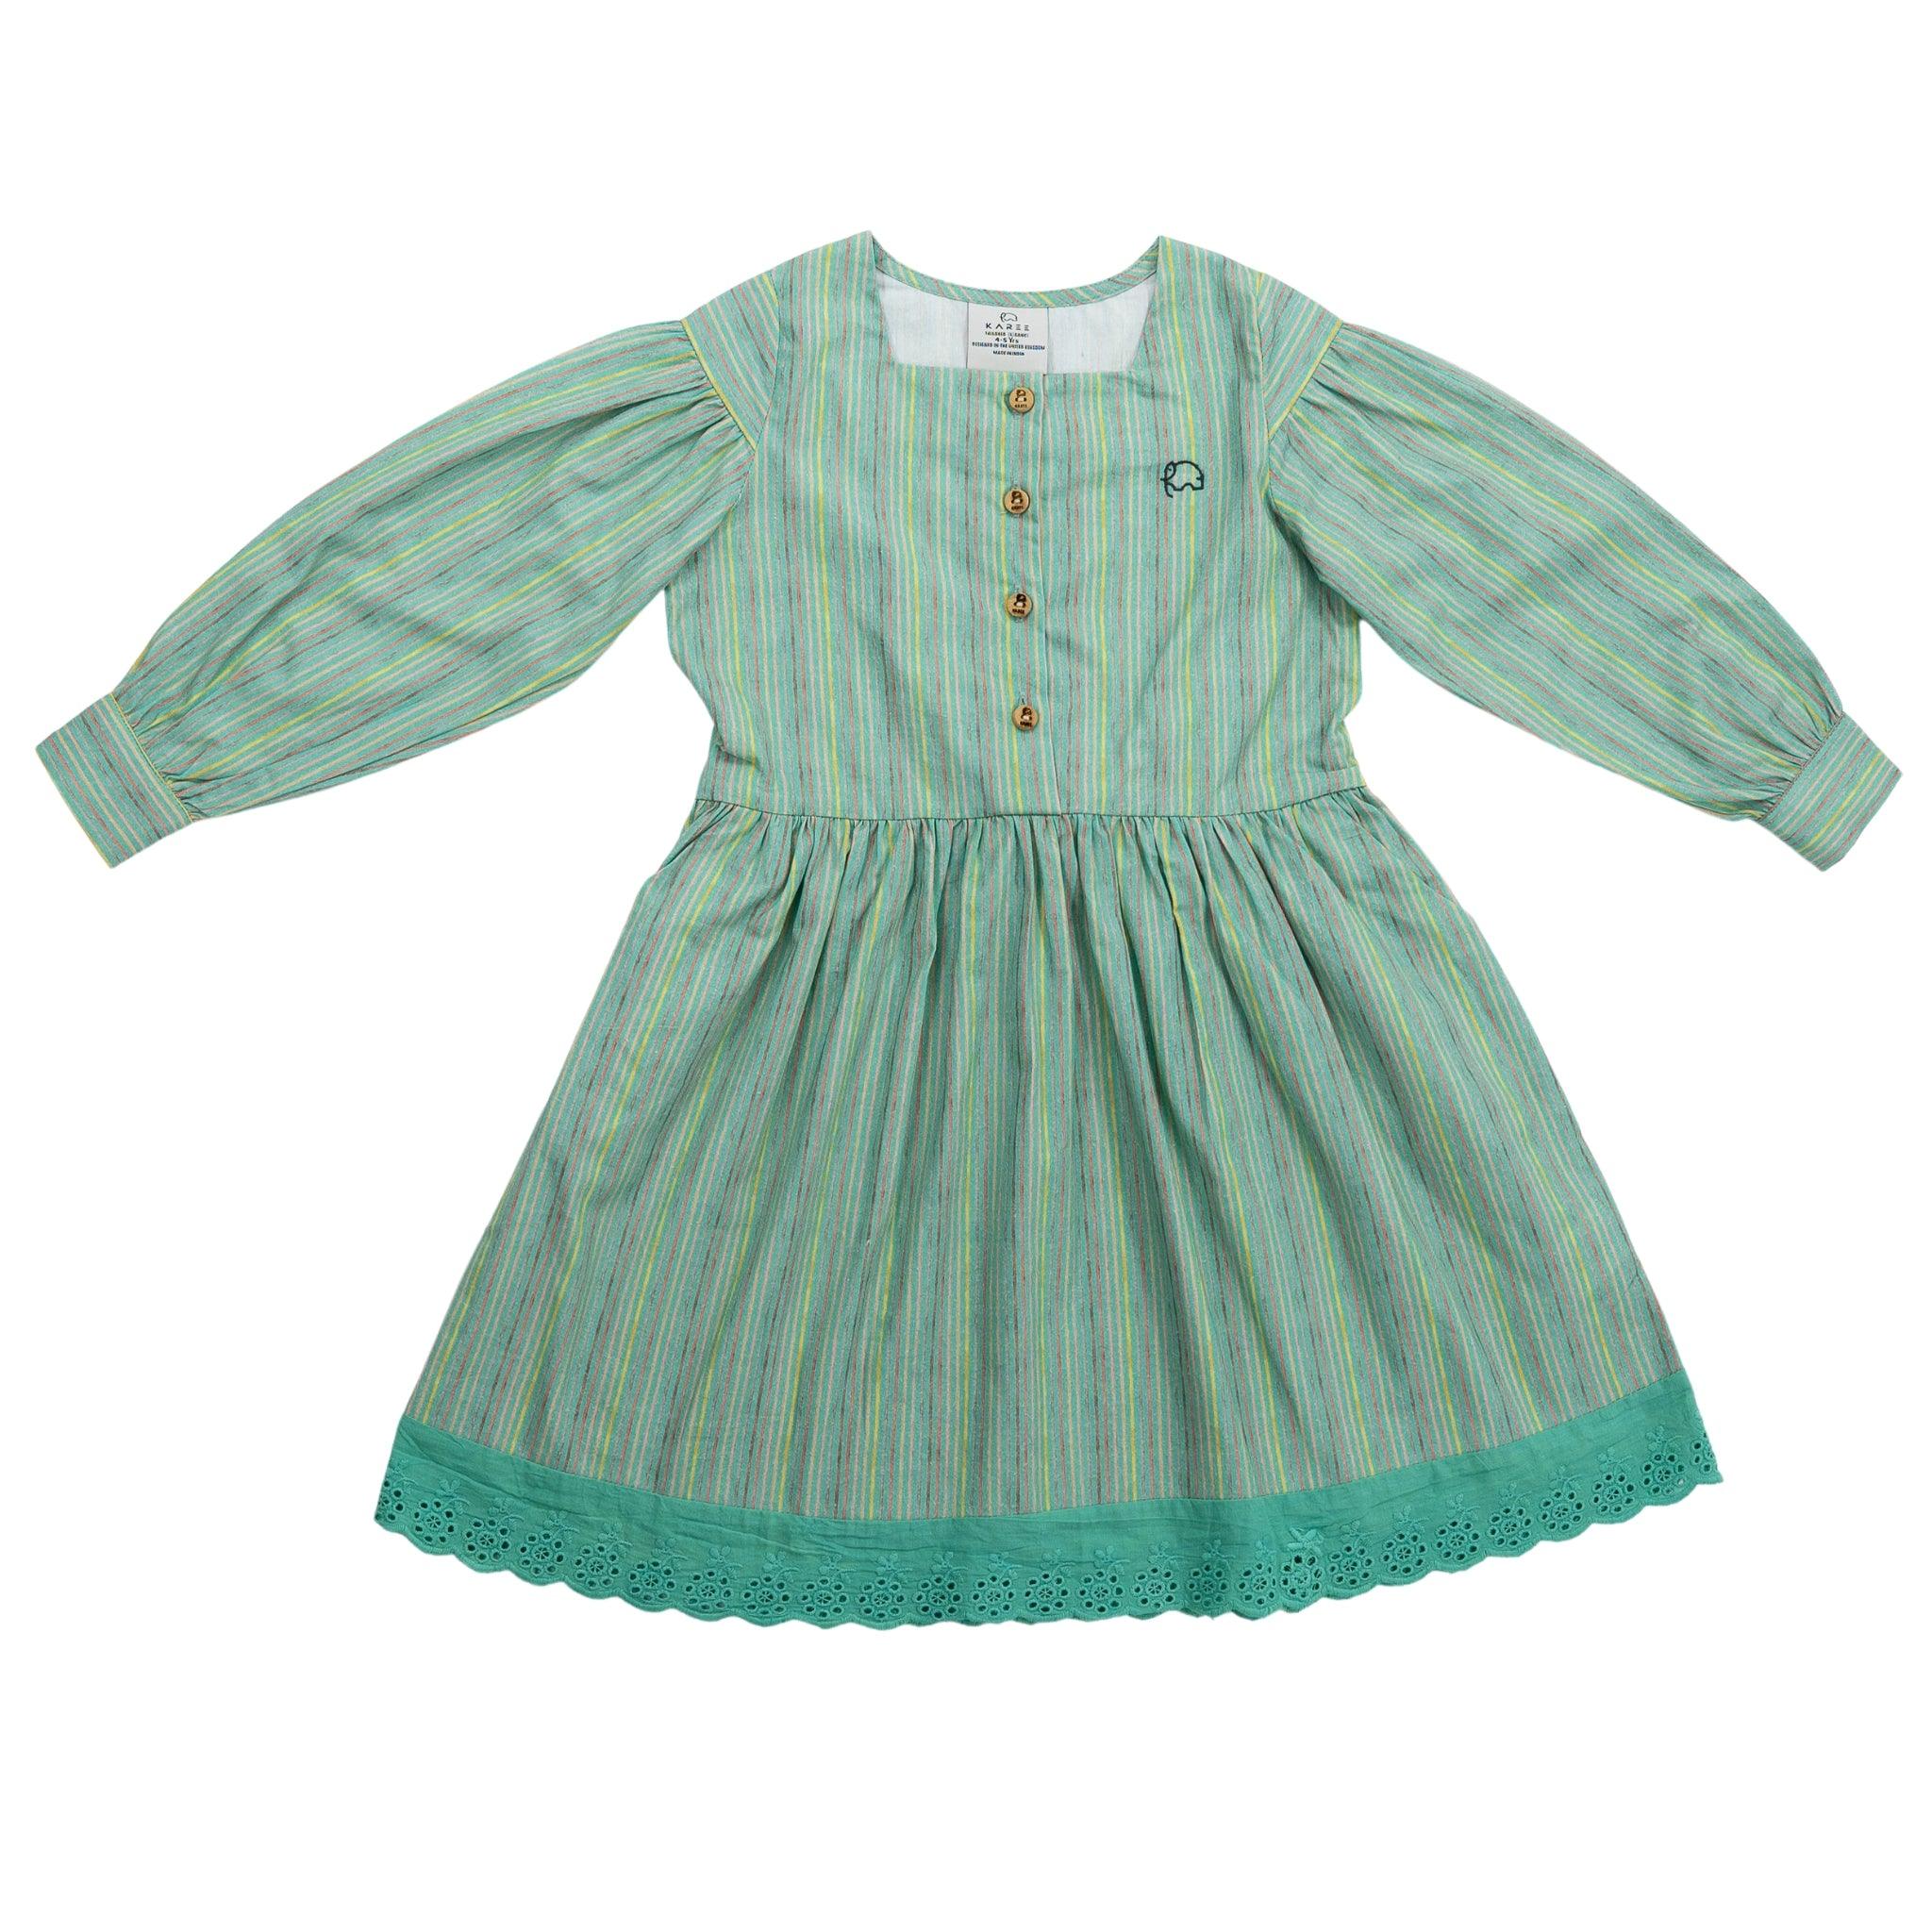 A Karee green and blue striped toddler dress with long puff sleeves, a peter pan collar, and teal lace trim at the hem, displayed against a white background.